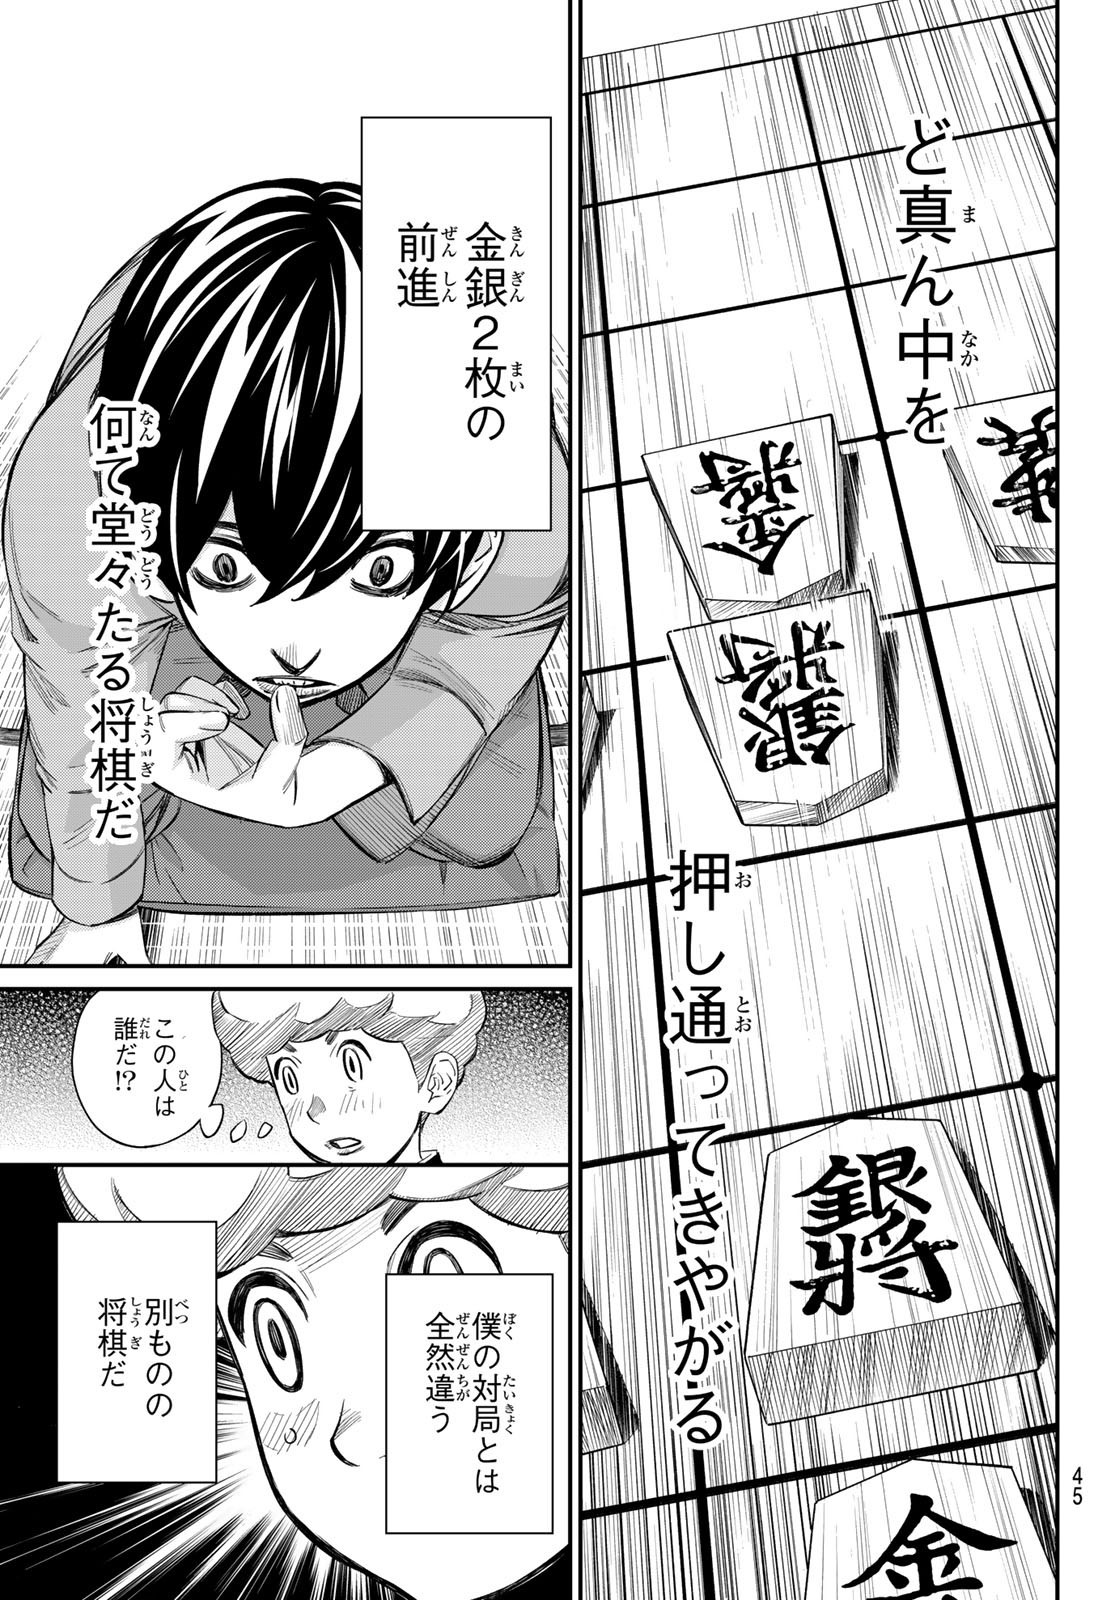 Weekly Shōnen Magazine - 週刊少年マガジン - Chapter 2024-32 - Page 43